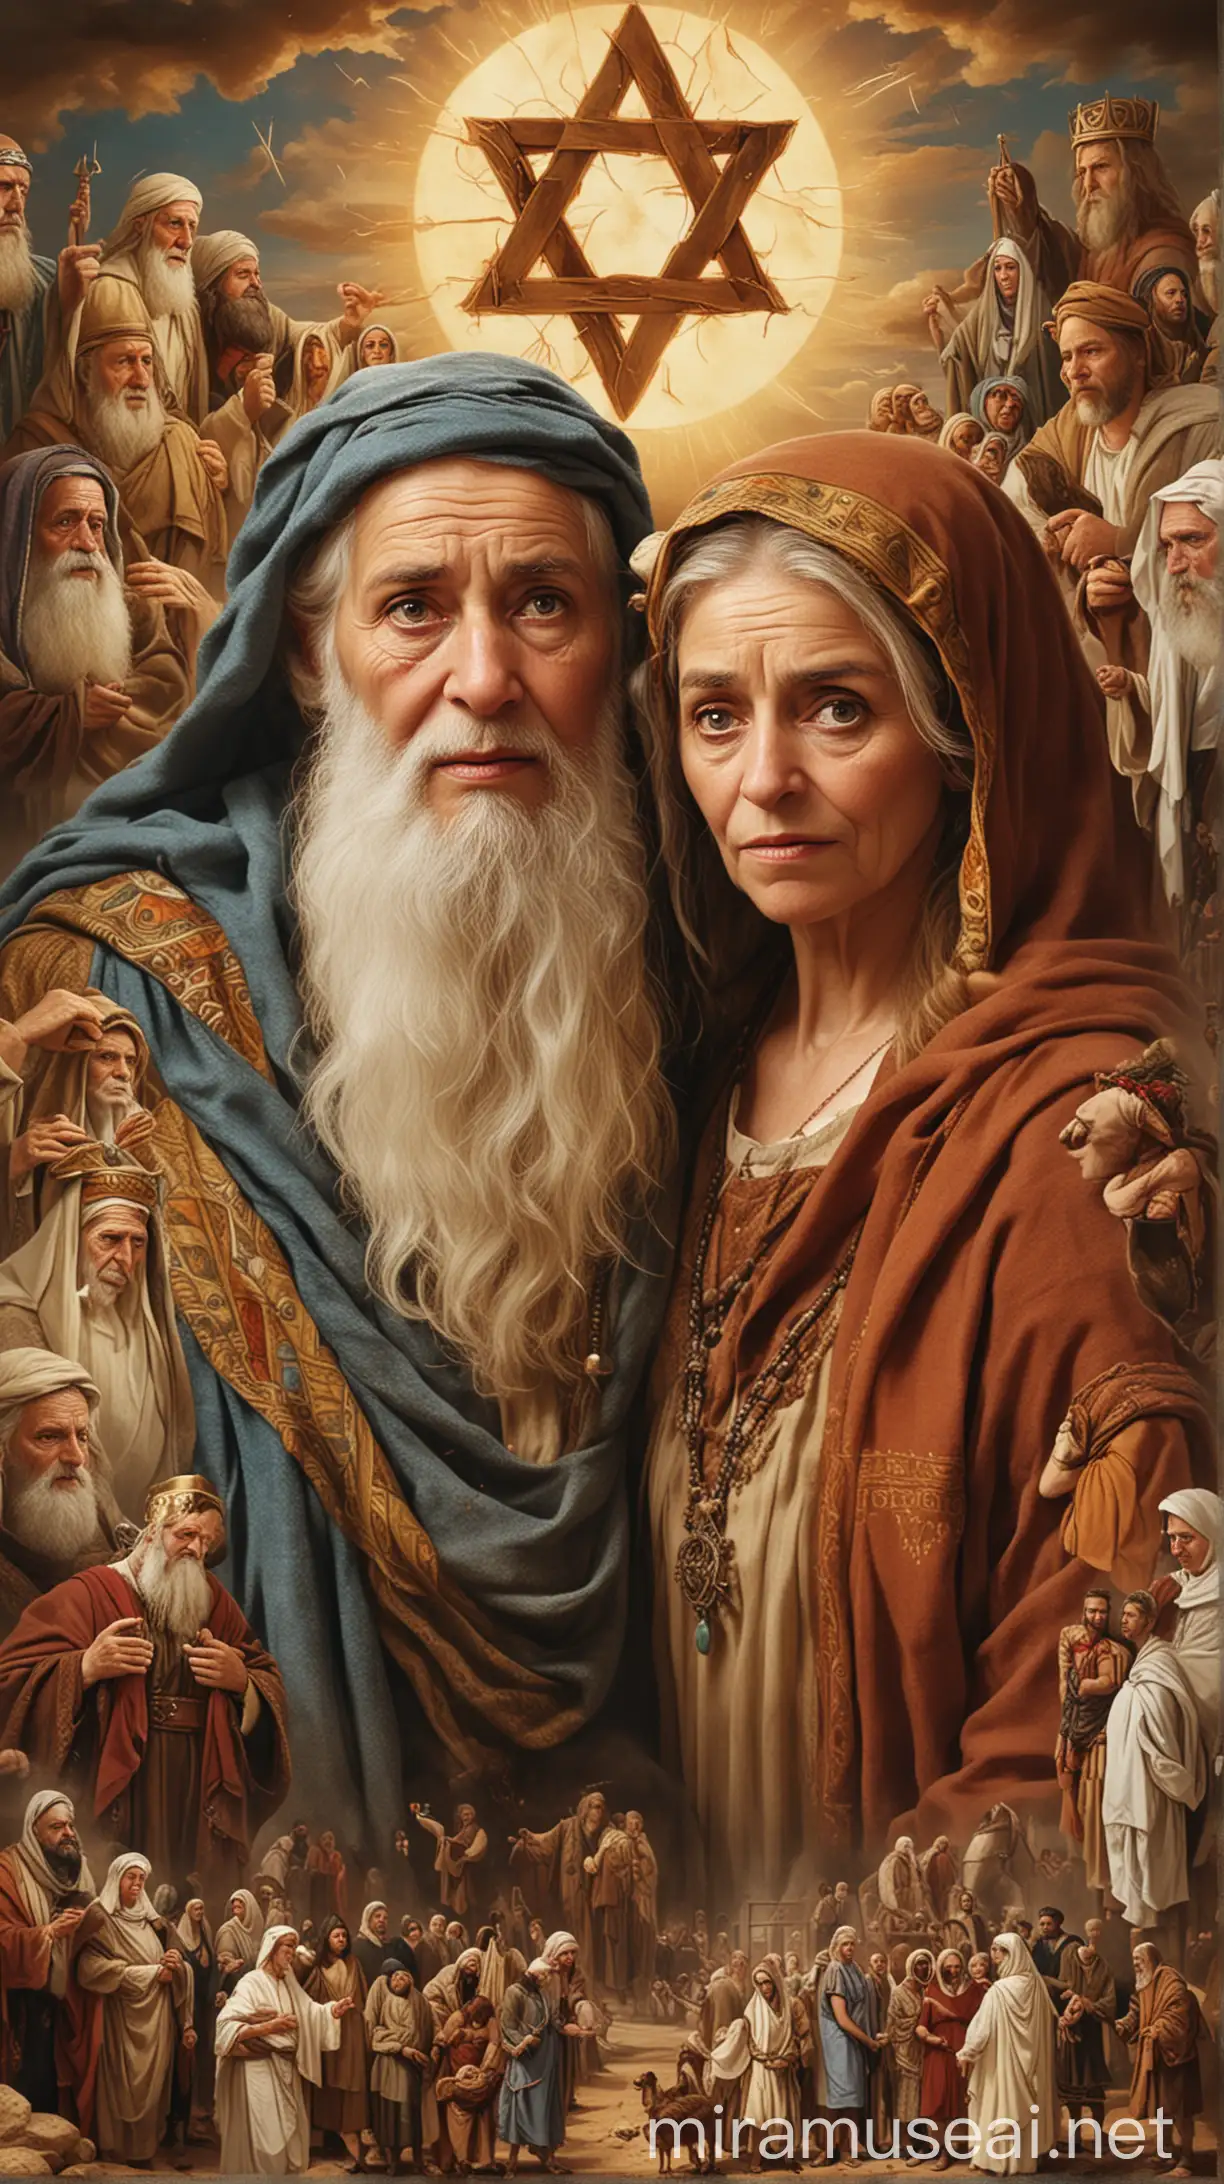 Generate an image depicting Isaac and Rebekah, elderly Jewish parents, surrounded by symbolic representations of bitterness, reflecting the challenges they faced due to Esau's choices.